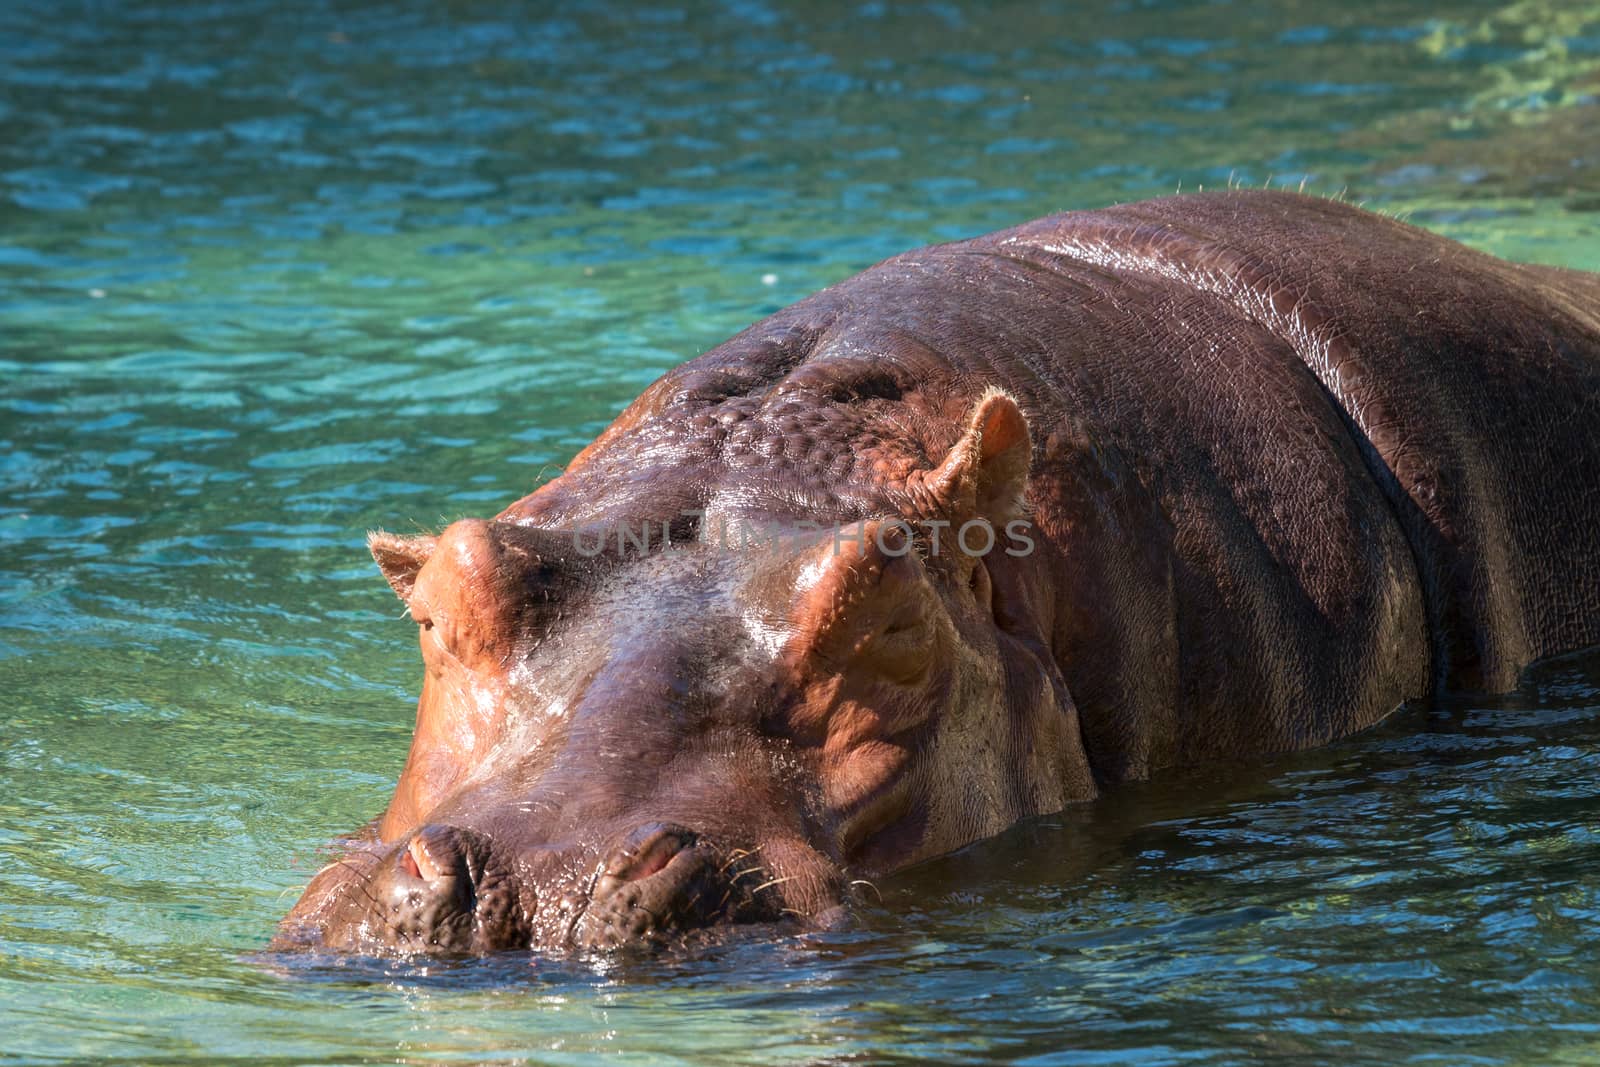 Hippo in water South Africa. Hippo in the water looking straight at the camera.